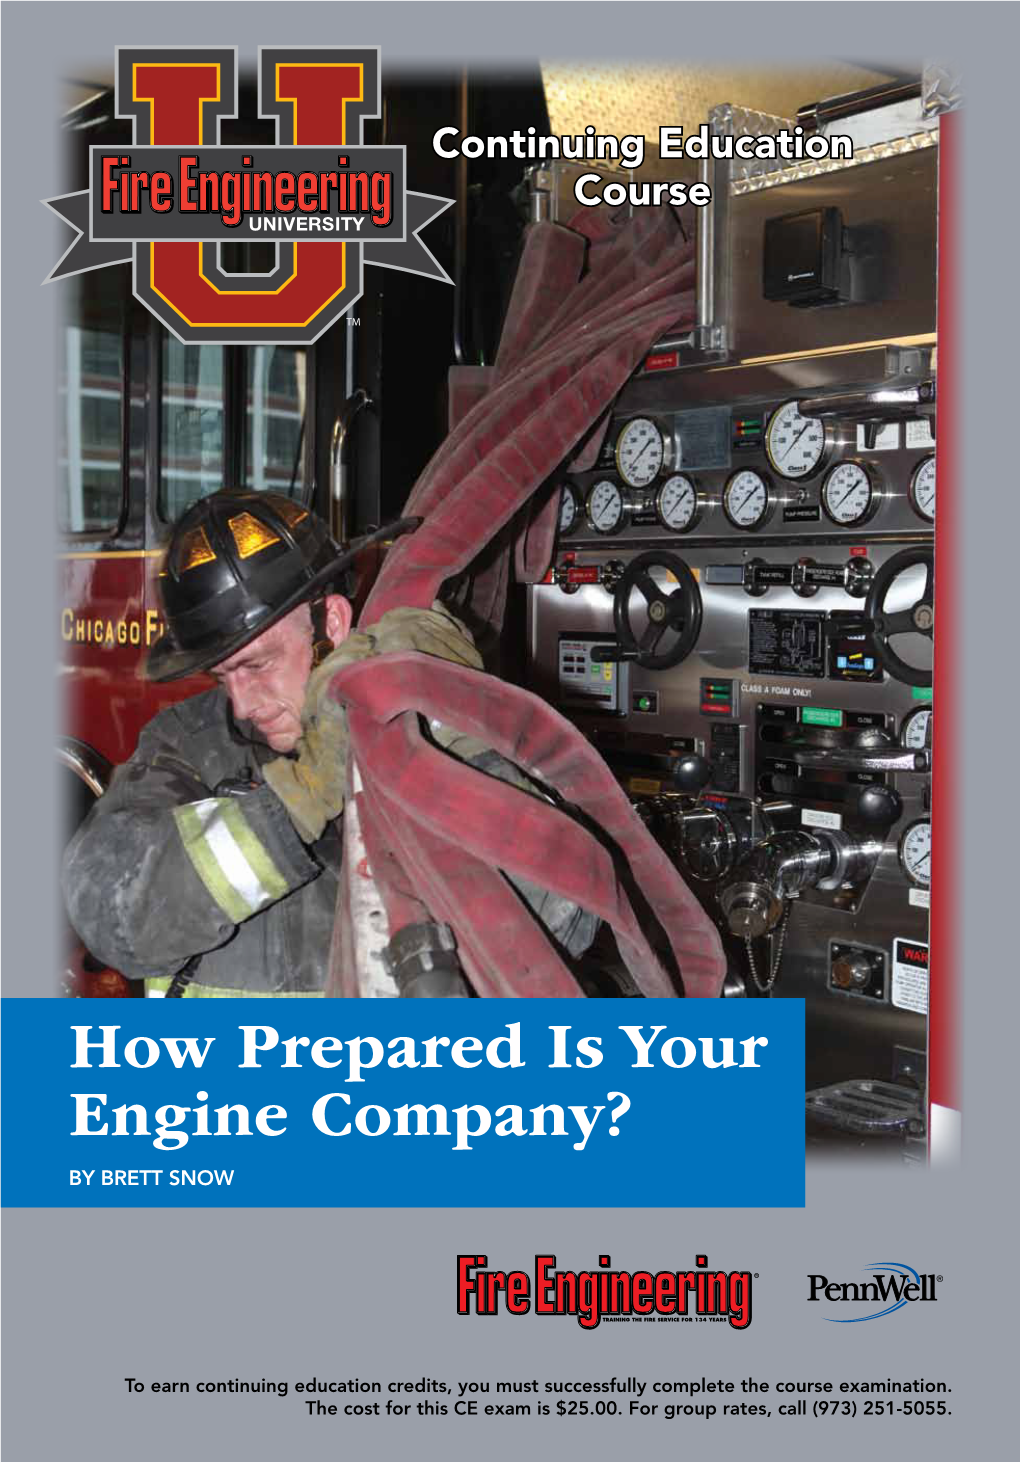 How Prepared Is Your Engine Company? by BRETT SNOW